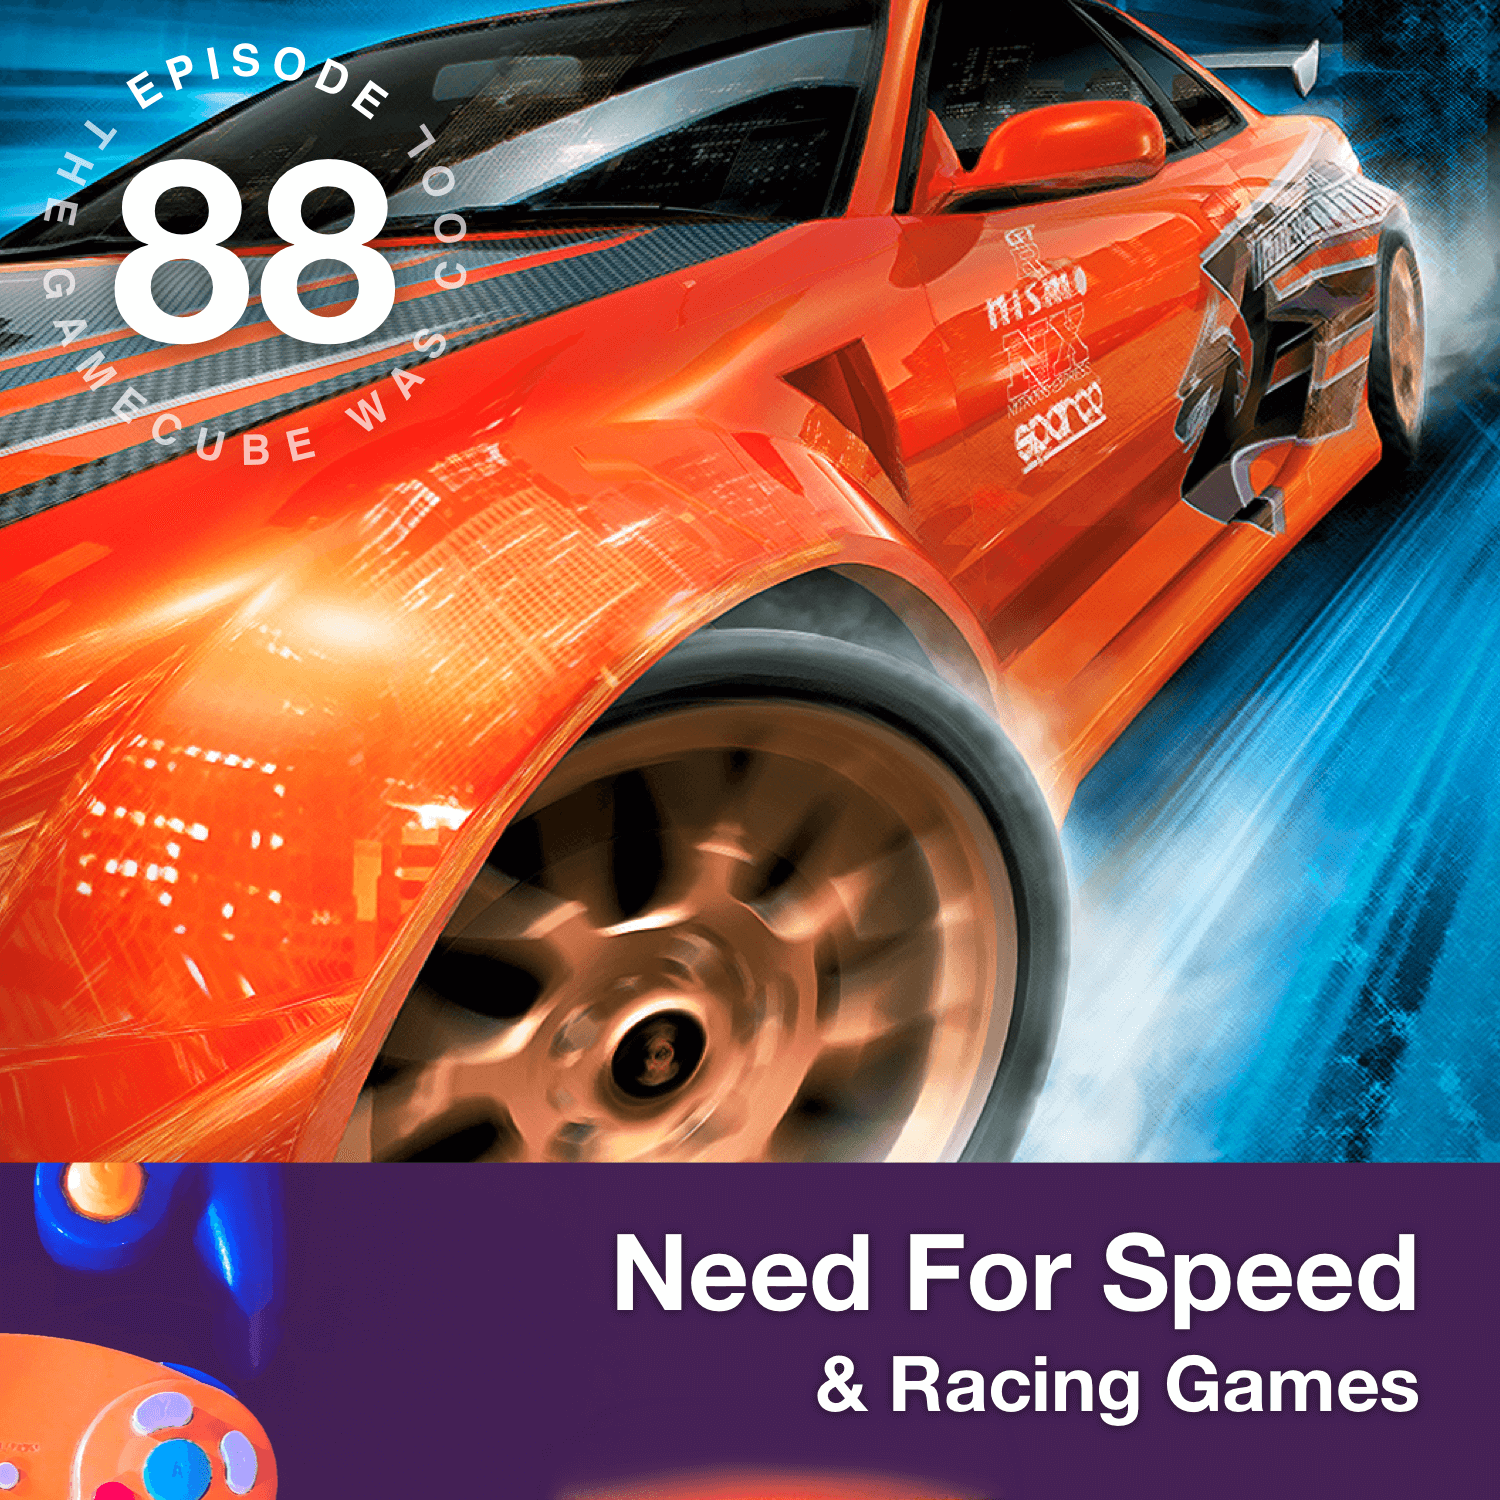 Need For Speed & Racing Games